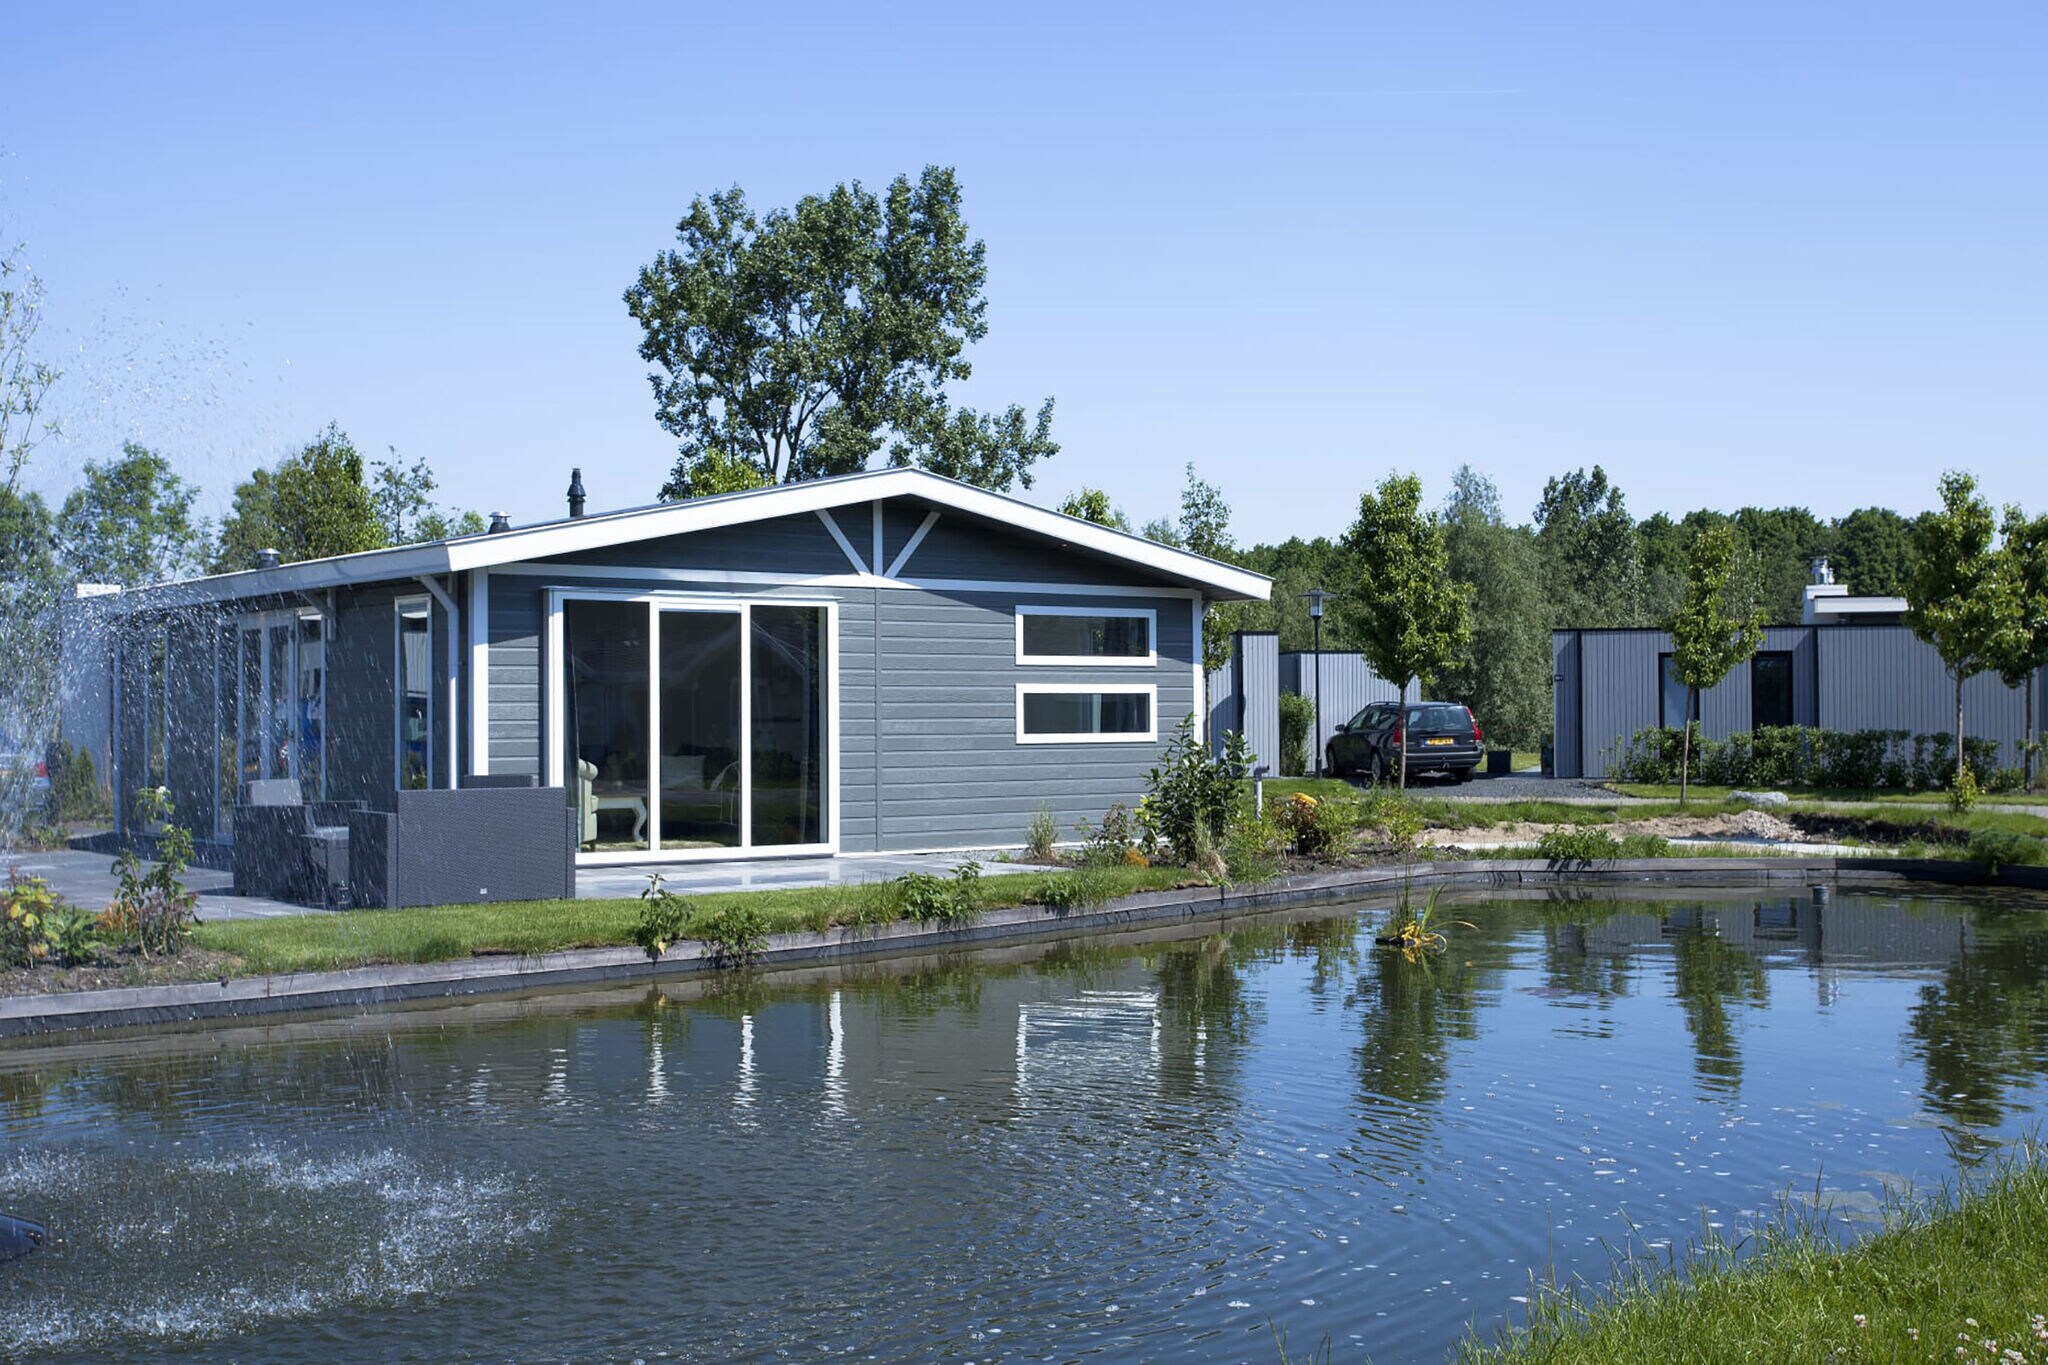 Comfortable chalet with dishwasher, on a holiday park, 25 km. from Amsterdam